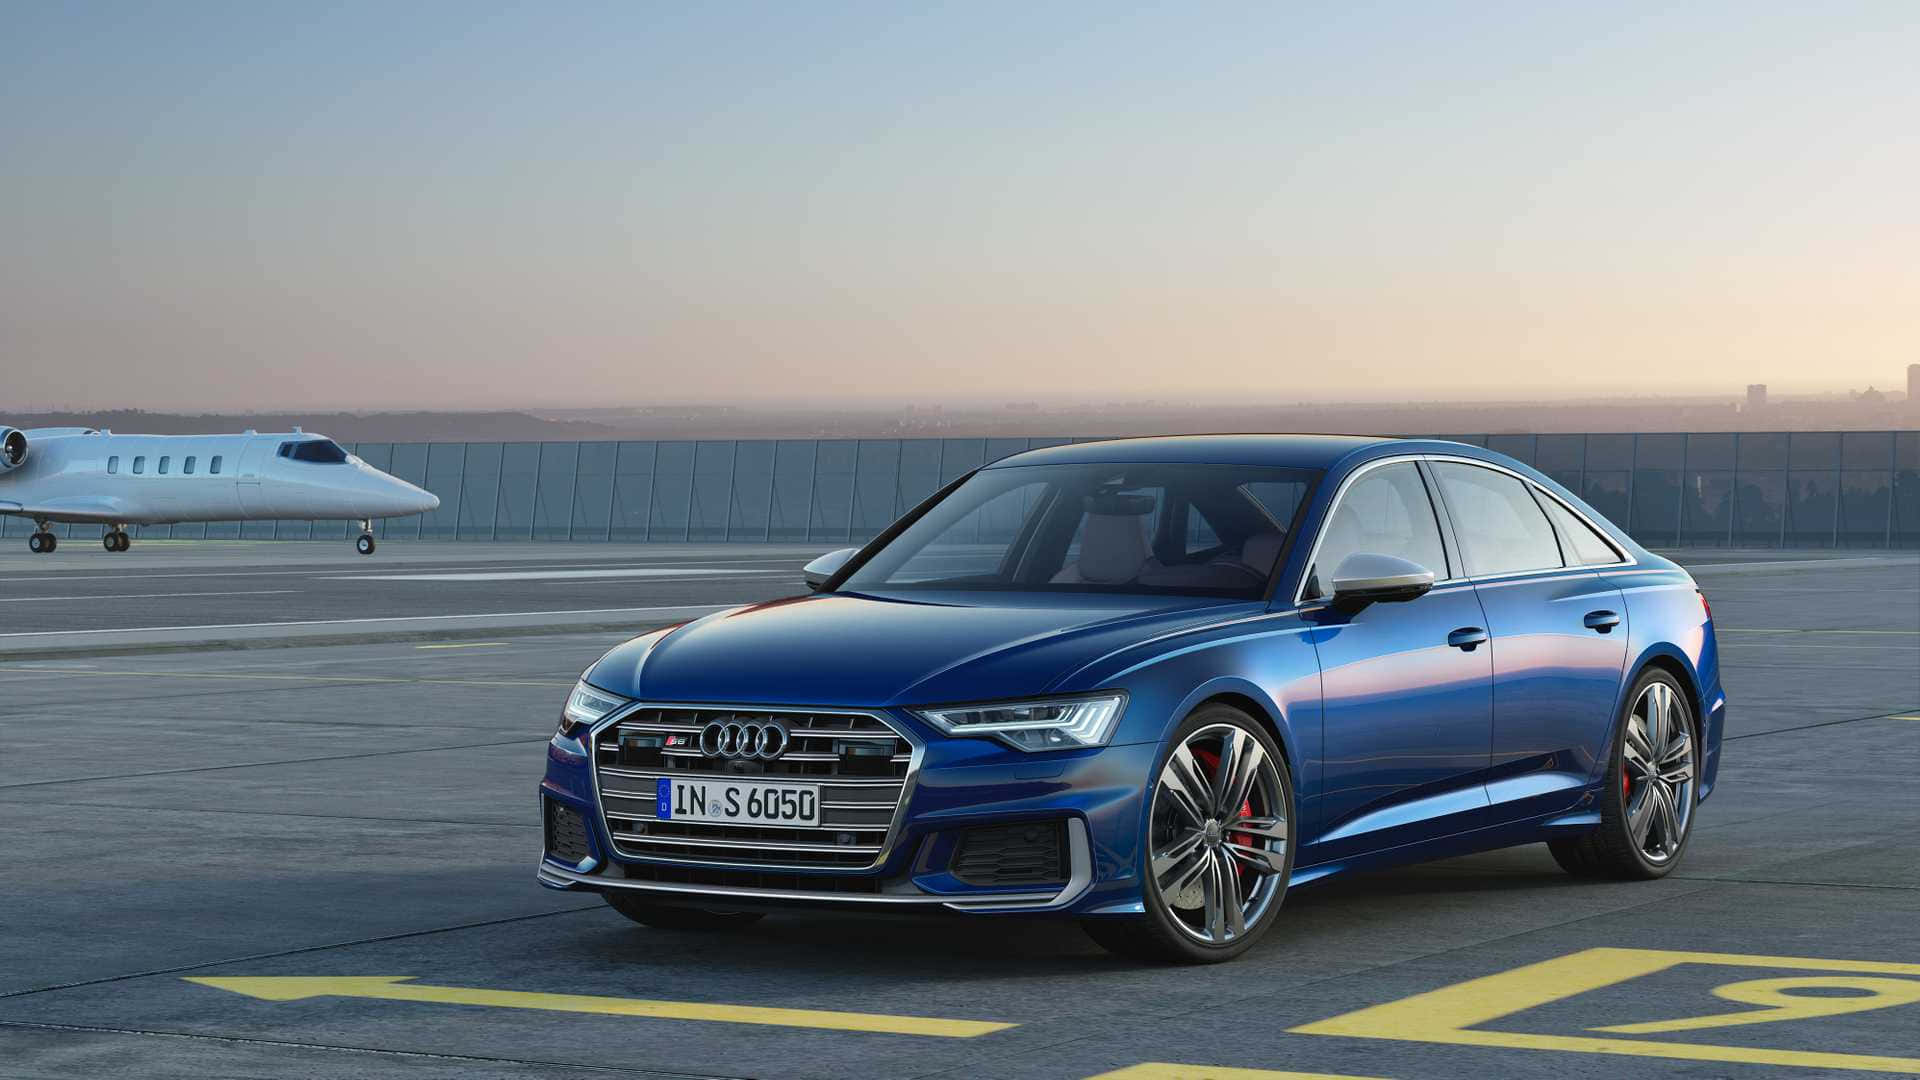 Sleek and Powerful Audi S6 in Action Wallpaper